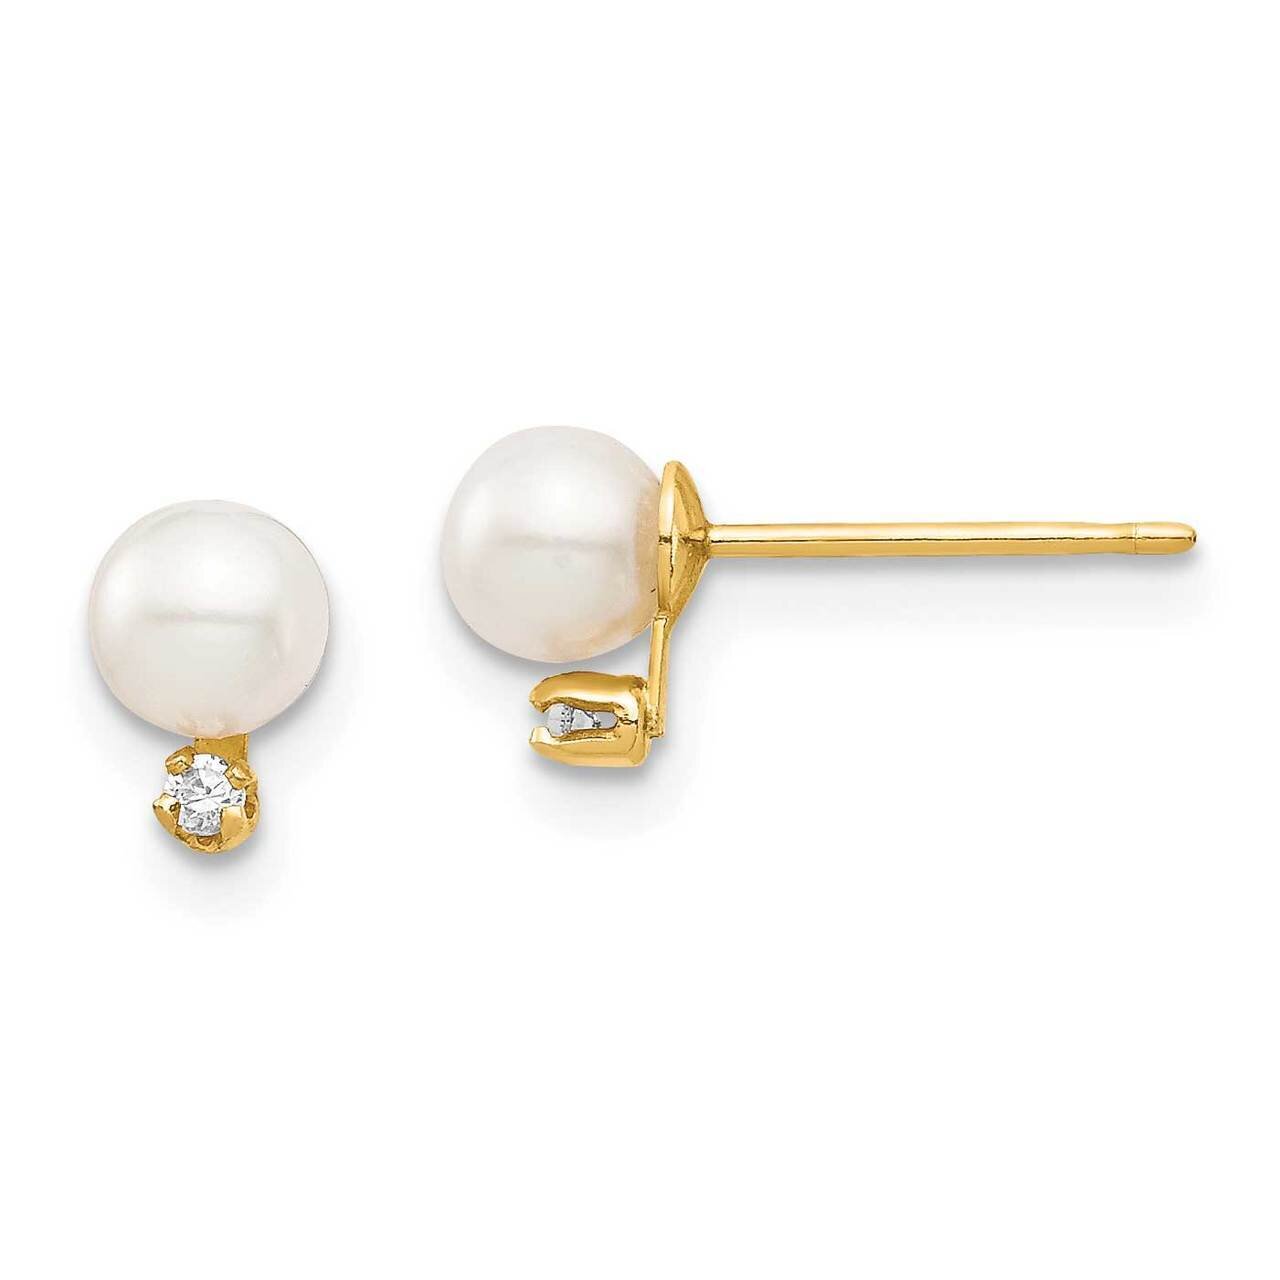 4-5mm White Round Freshwater Cultured Pearls Post Earrings 14k Gold CZ Diamond SE2948